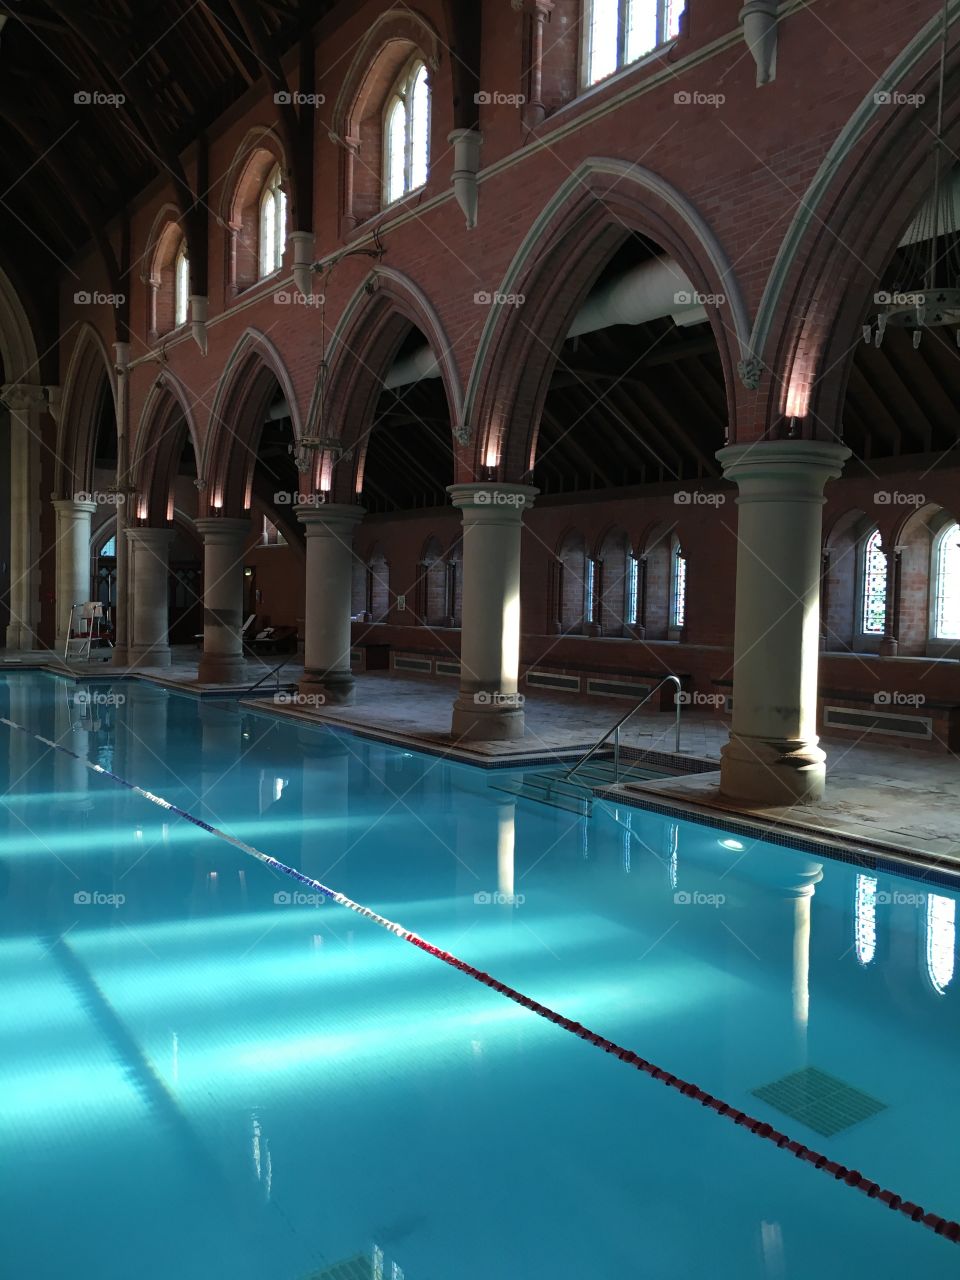 Swimming pool in a converted church